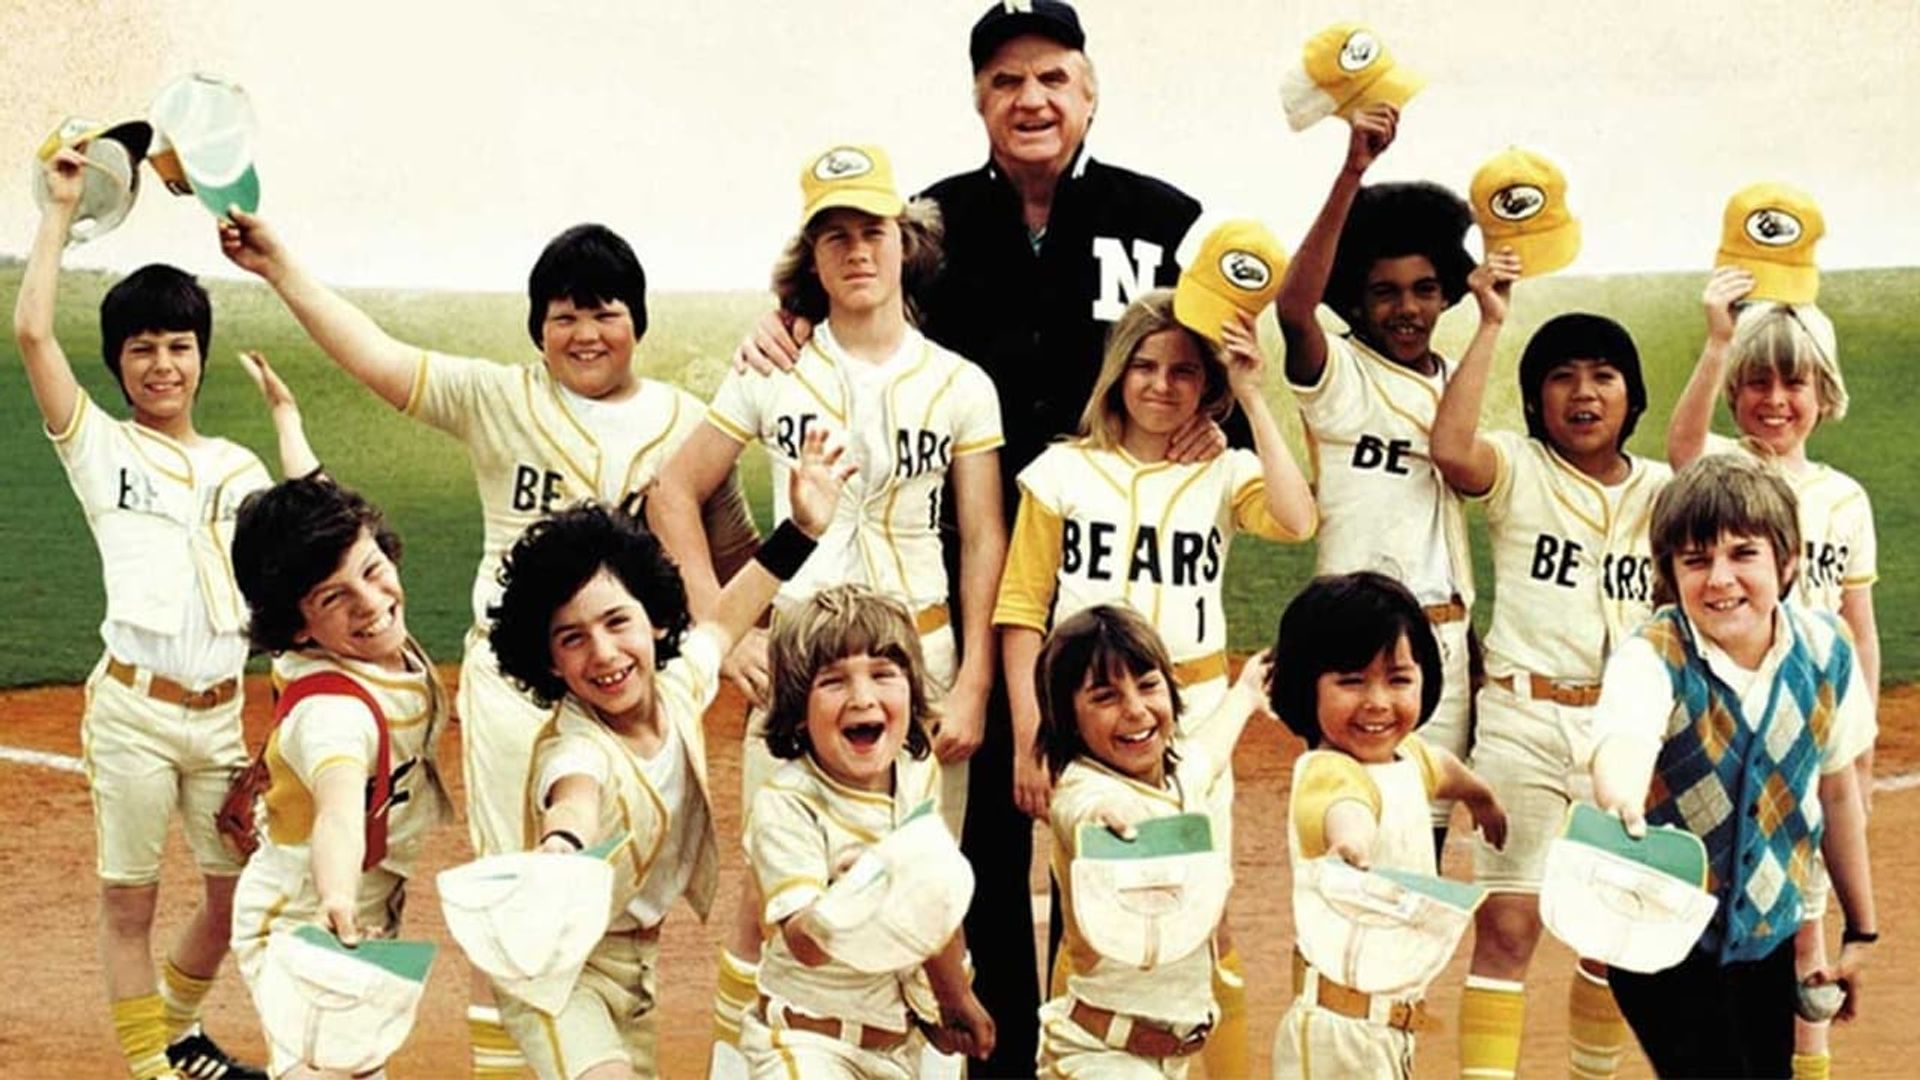 The Bad News Bears background